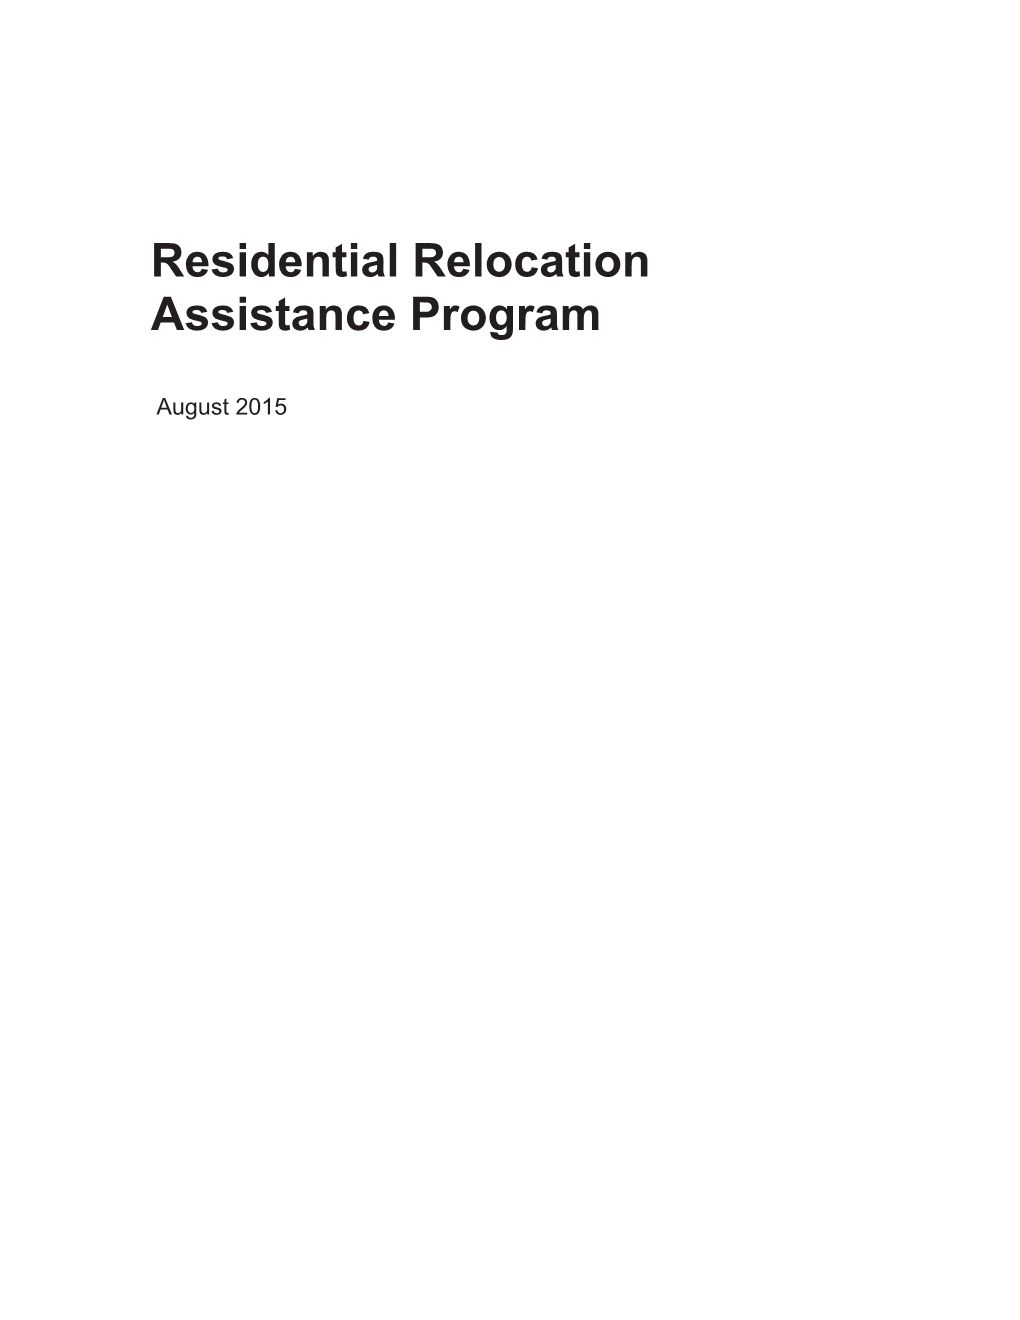 Residential Relocation Assistance Program